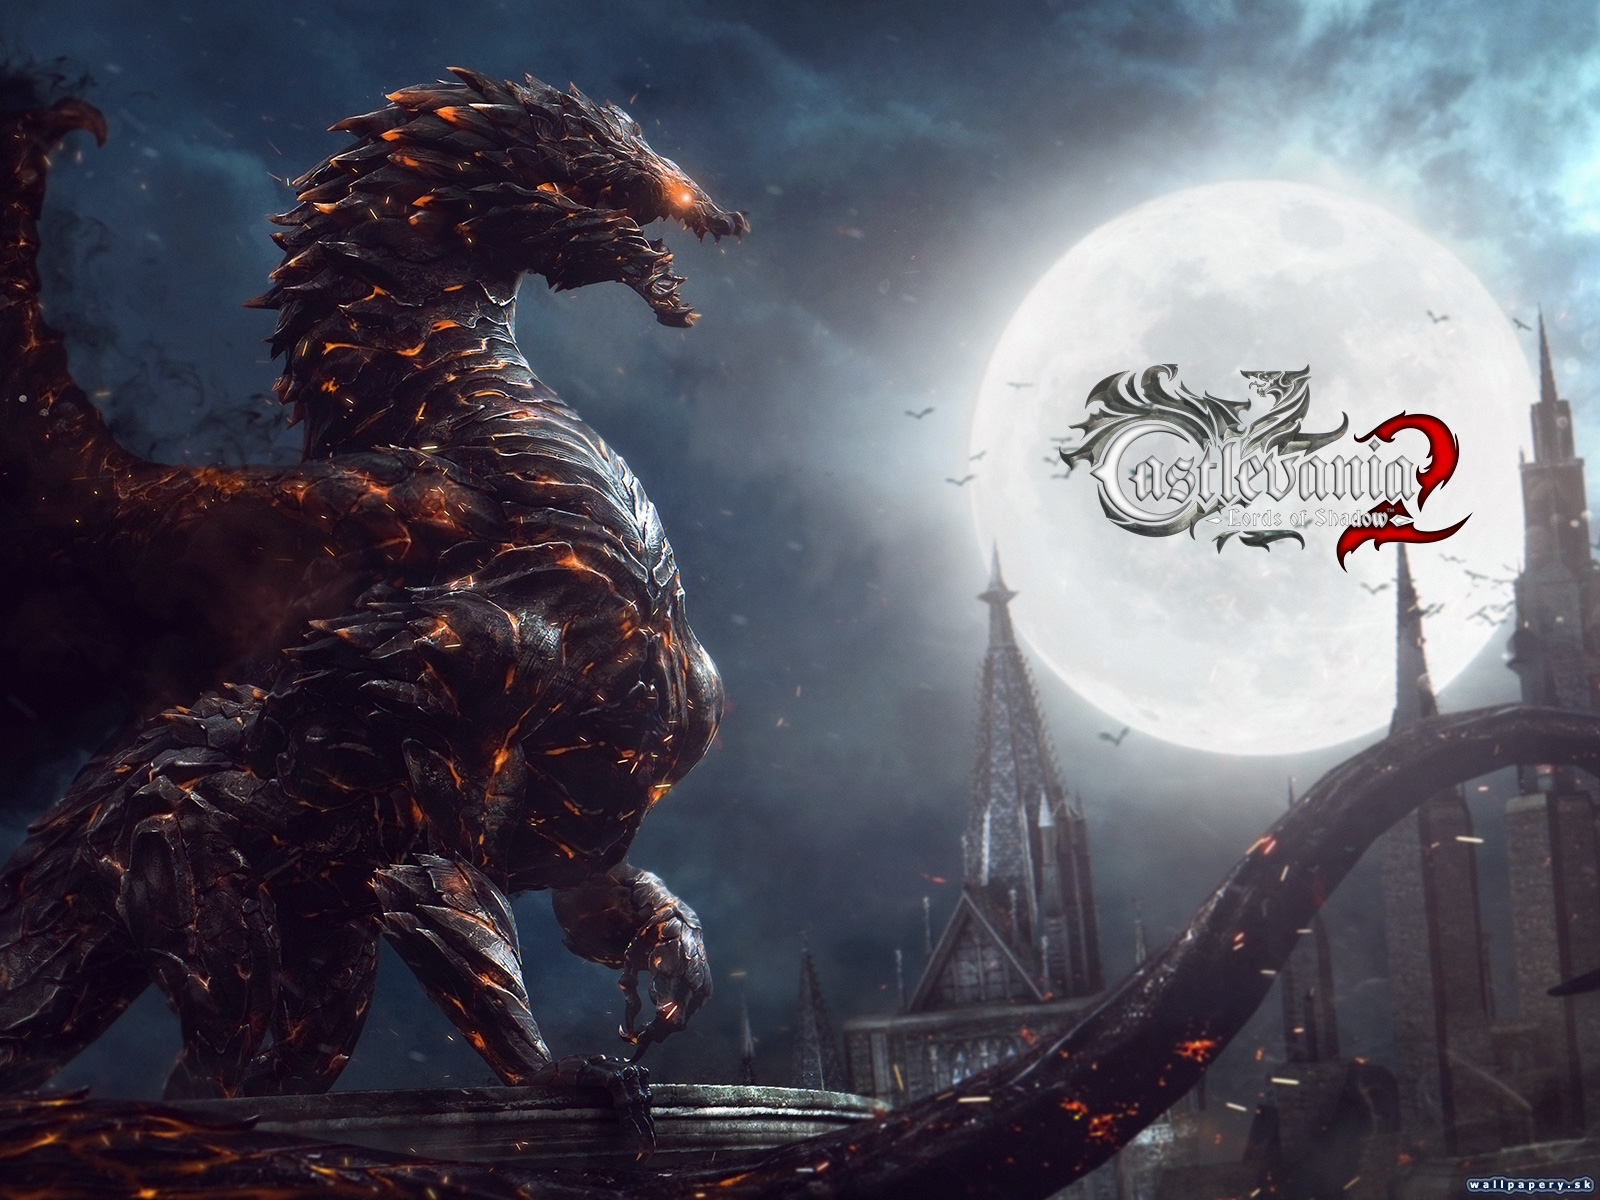 Castlevania: Lords of Shadow 2 - wallpaper 7